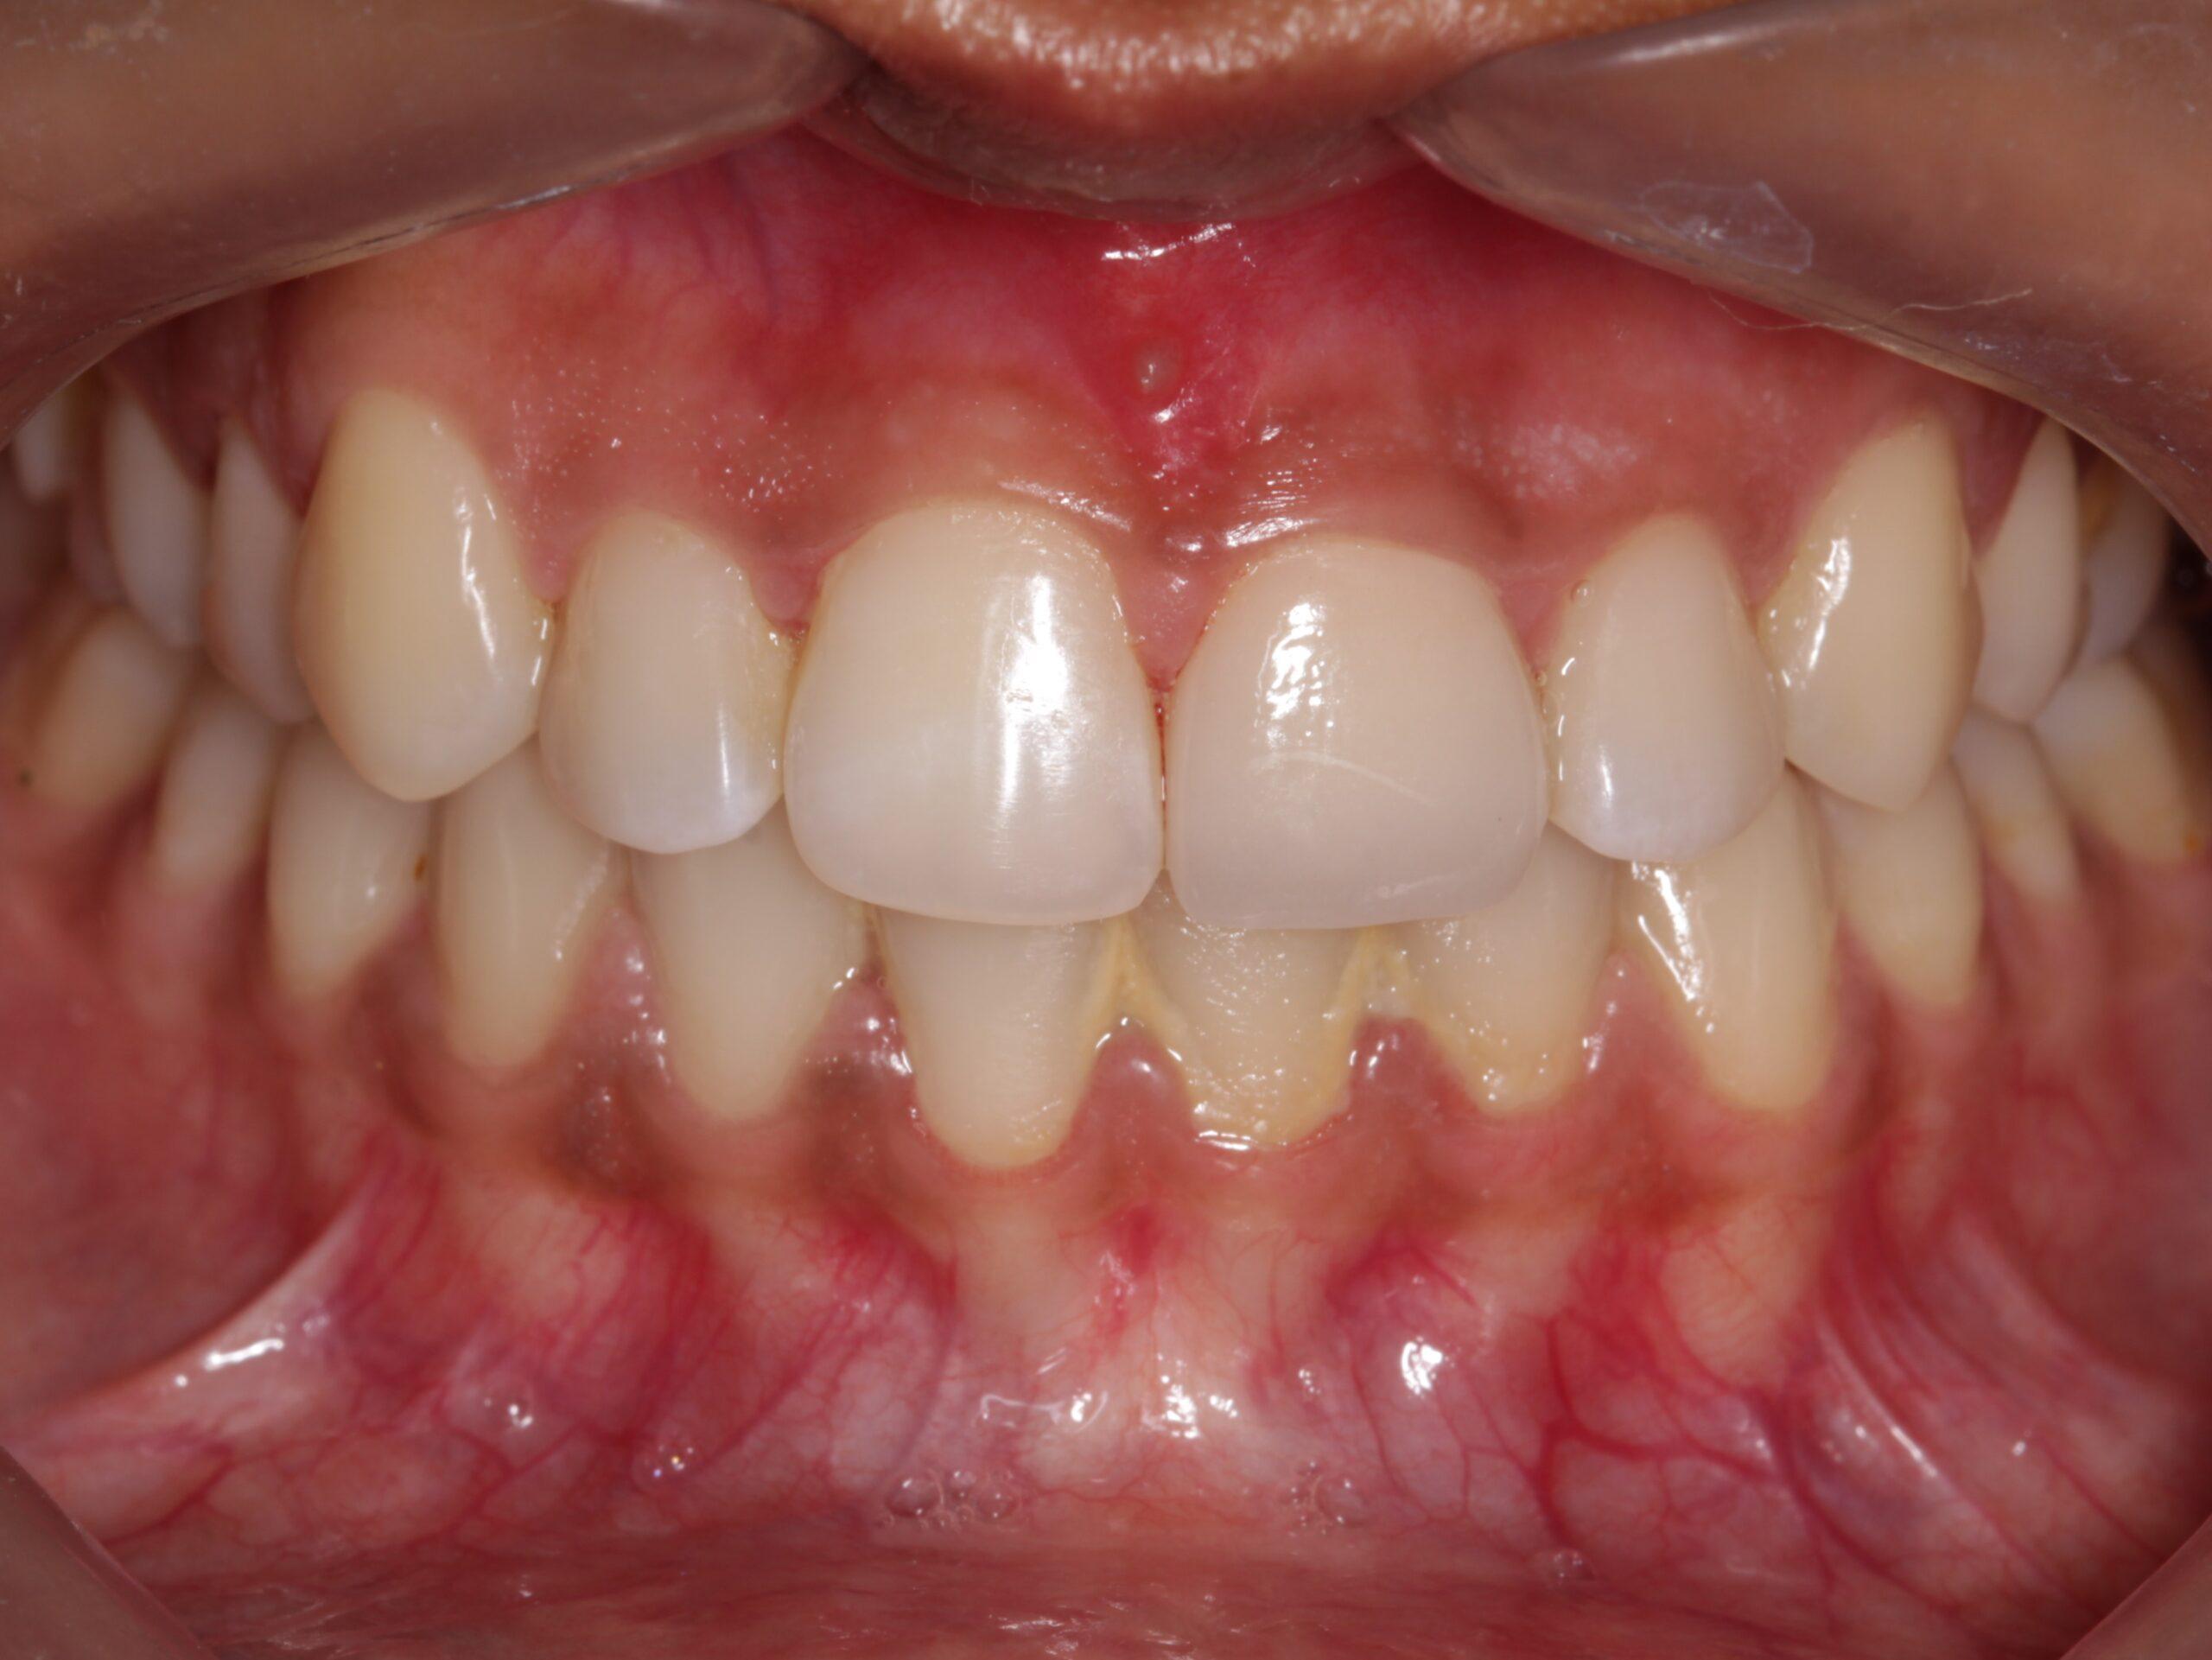 http://dentalexcellence.co.in/wp-content/uploads/2019/11/Pt-2-Post-1-scaled.jpg